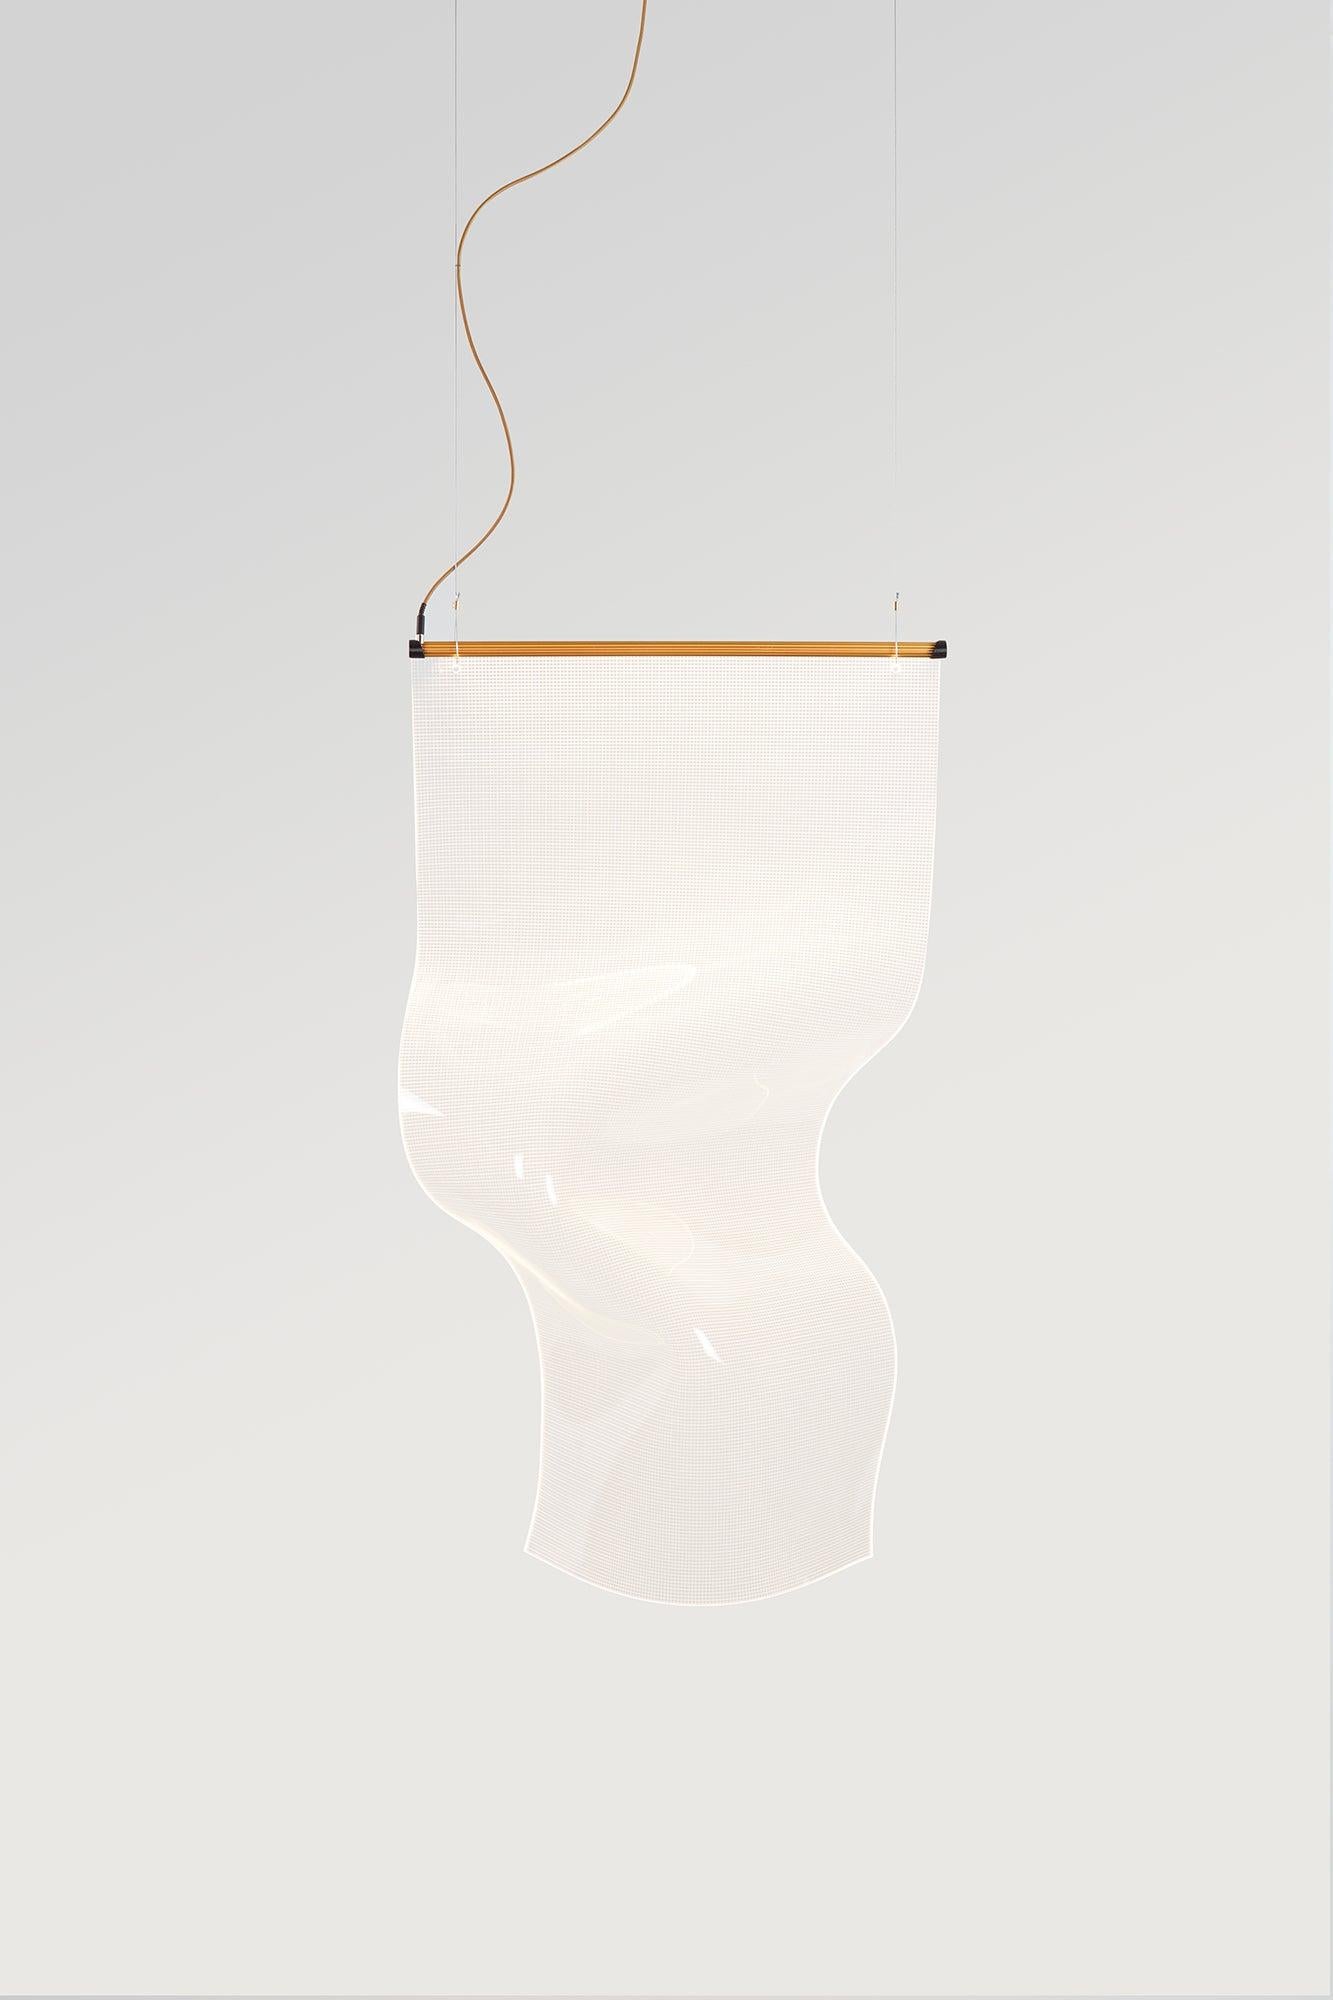 Gweilo Zhou V PE by Partisans for Parachilna.

It’s name means ghost in chinese. Makes sense when you look at it, right? Made from hand-molded acrylic.

Suspension lamp. Hand-moulded, transparent acrylic structure. Led strip embedded in the gold or